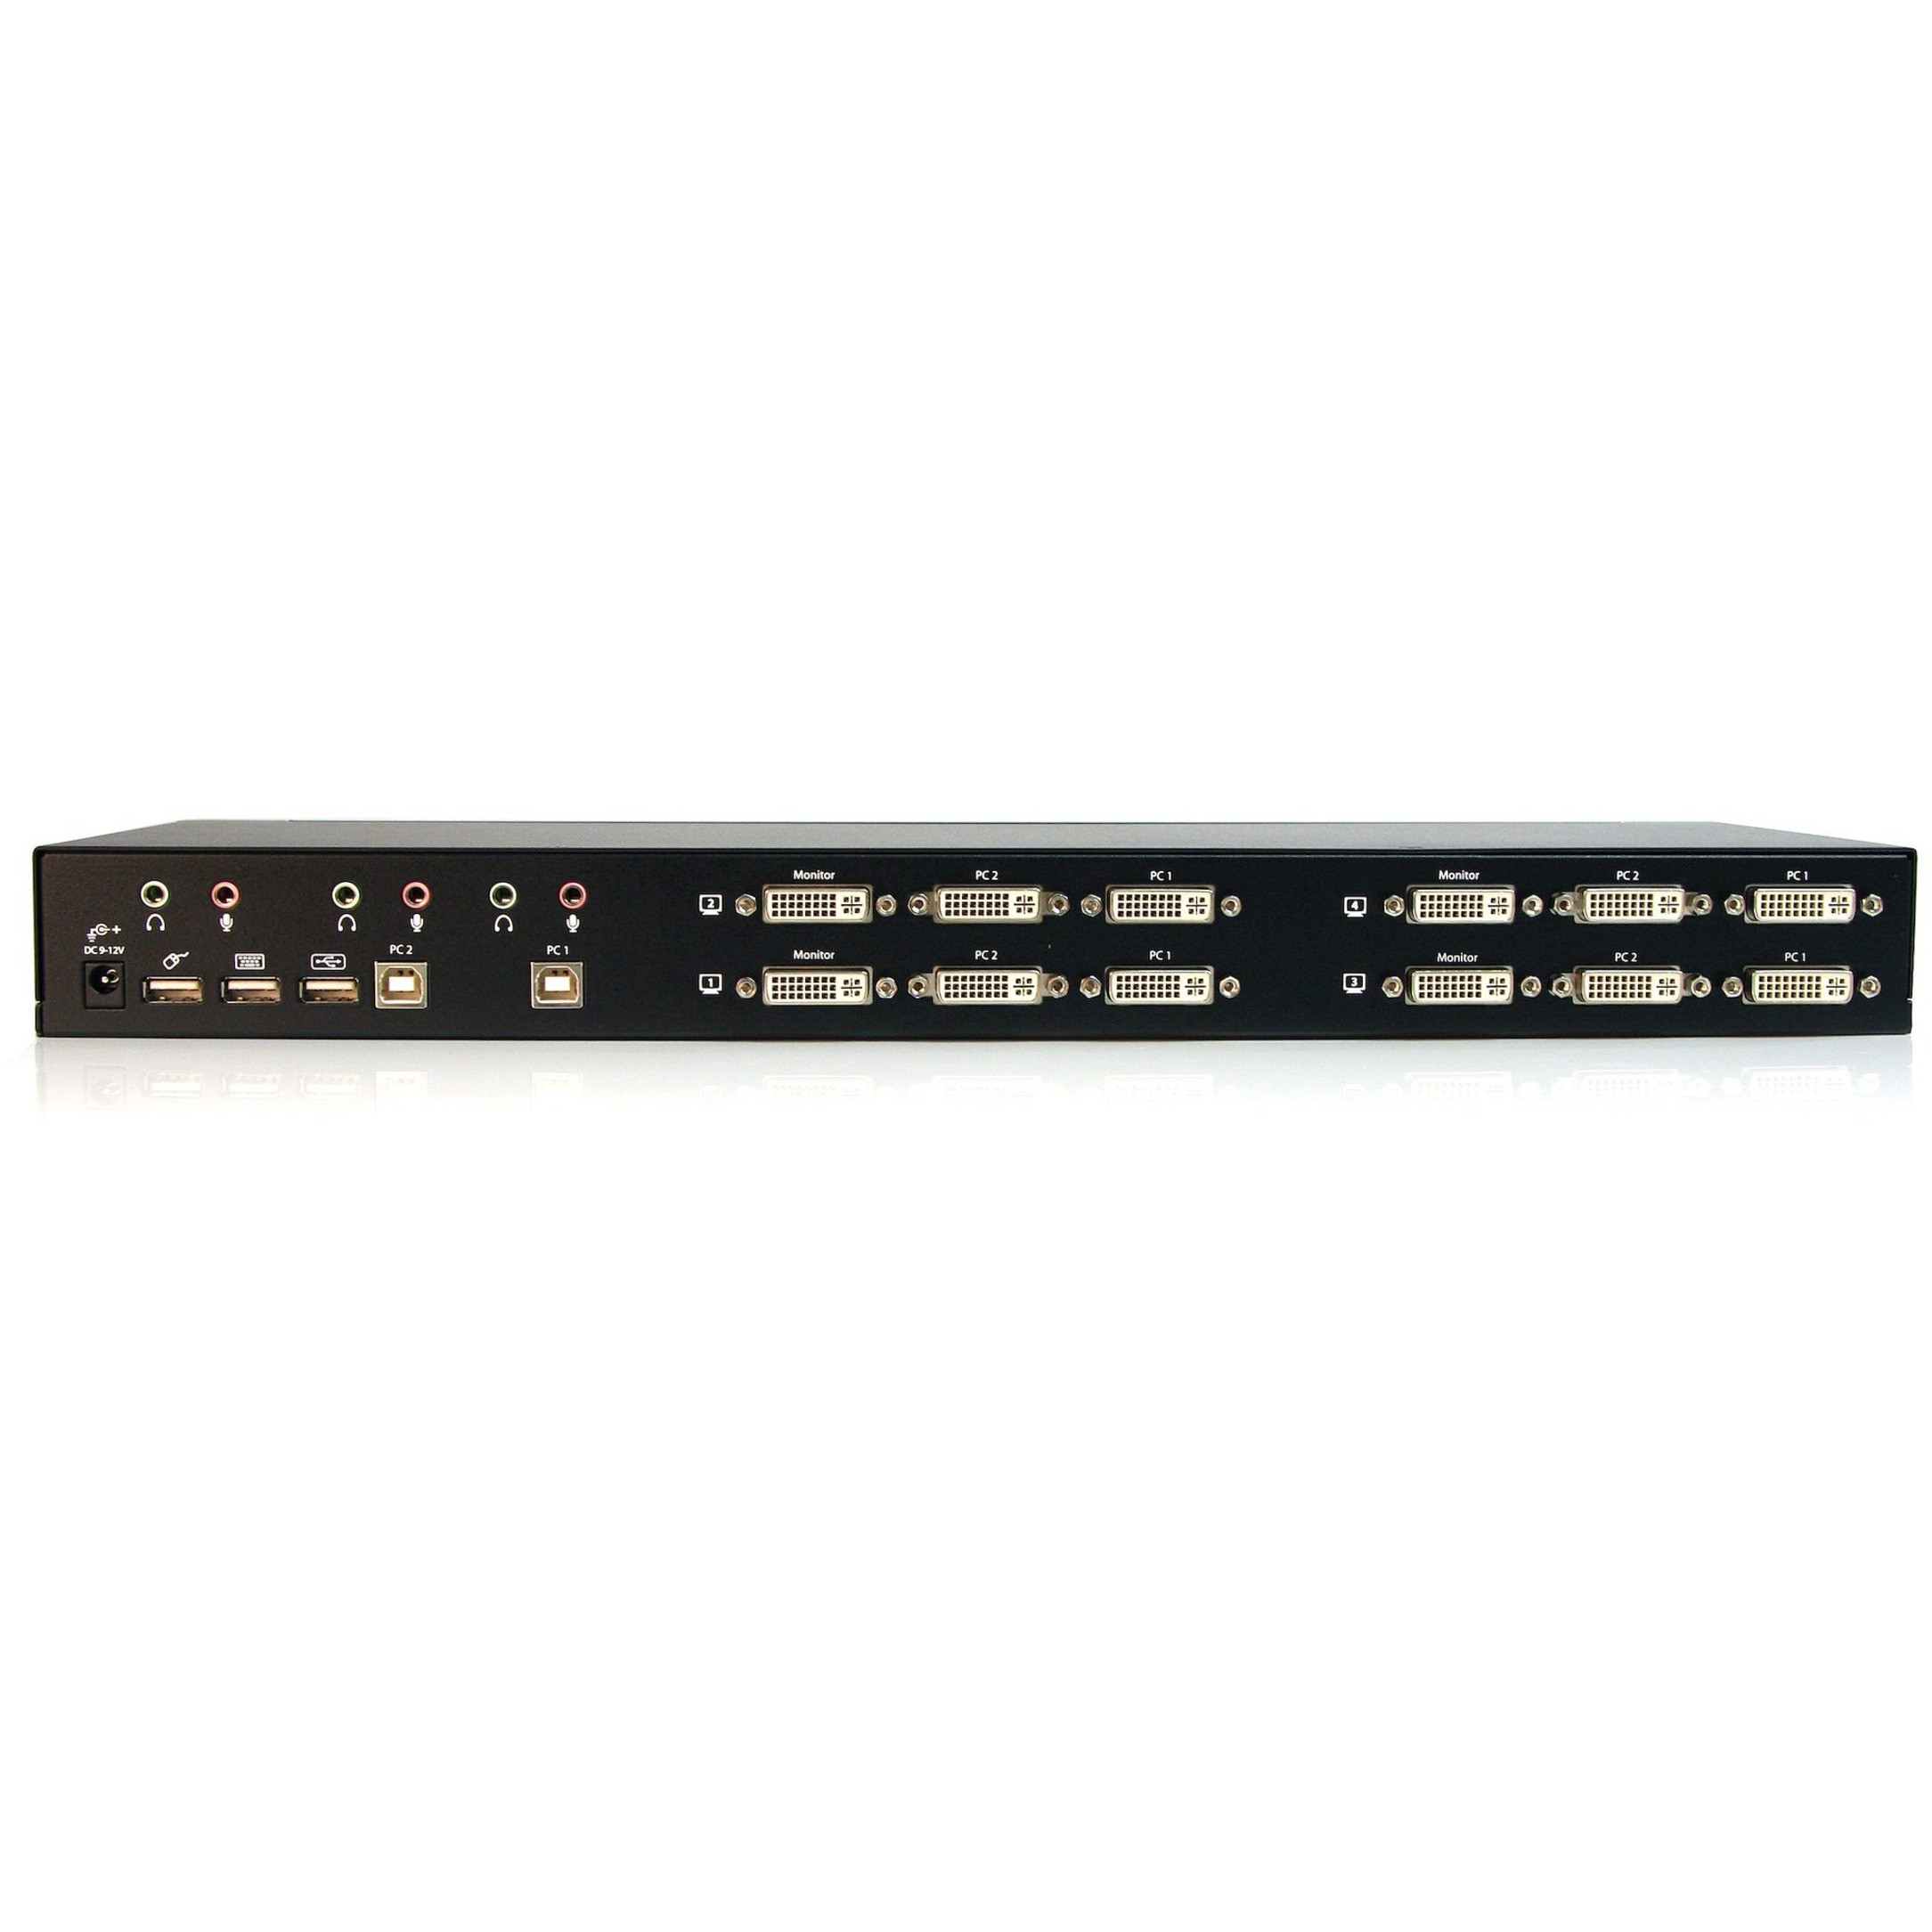 Startech .com 2 Port Quad Monitor Dual-Link DVI USB KVM Switch with Audio & HubSwitch between two Computers sharing four DVI displays, spe… SV231QDVIUA